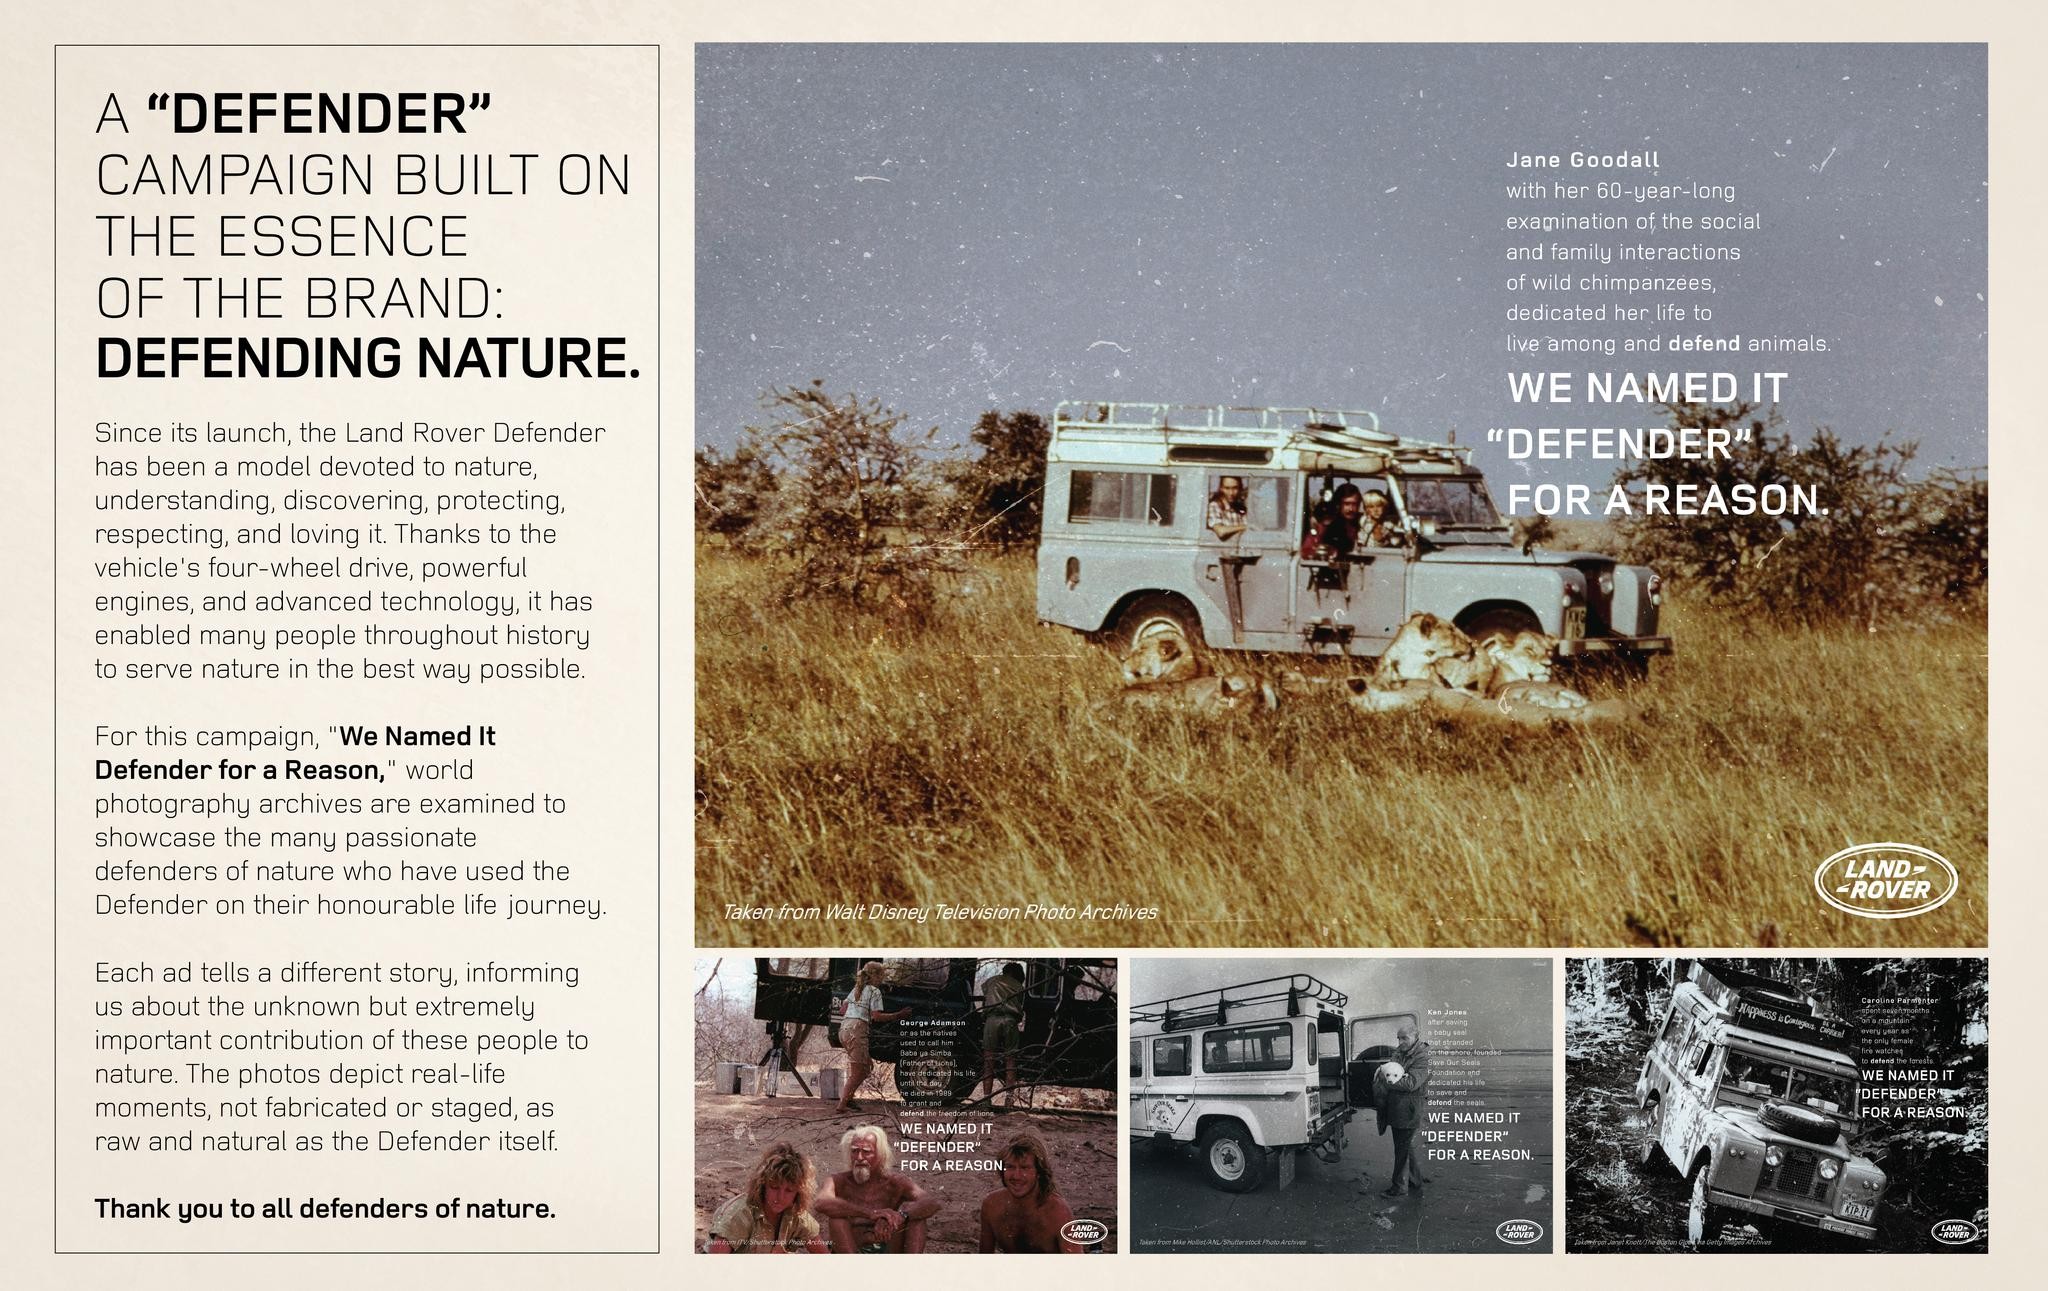 We Named It "Defender" For A Reason - Jane Goodall